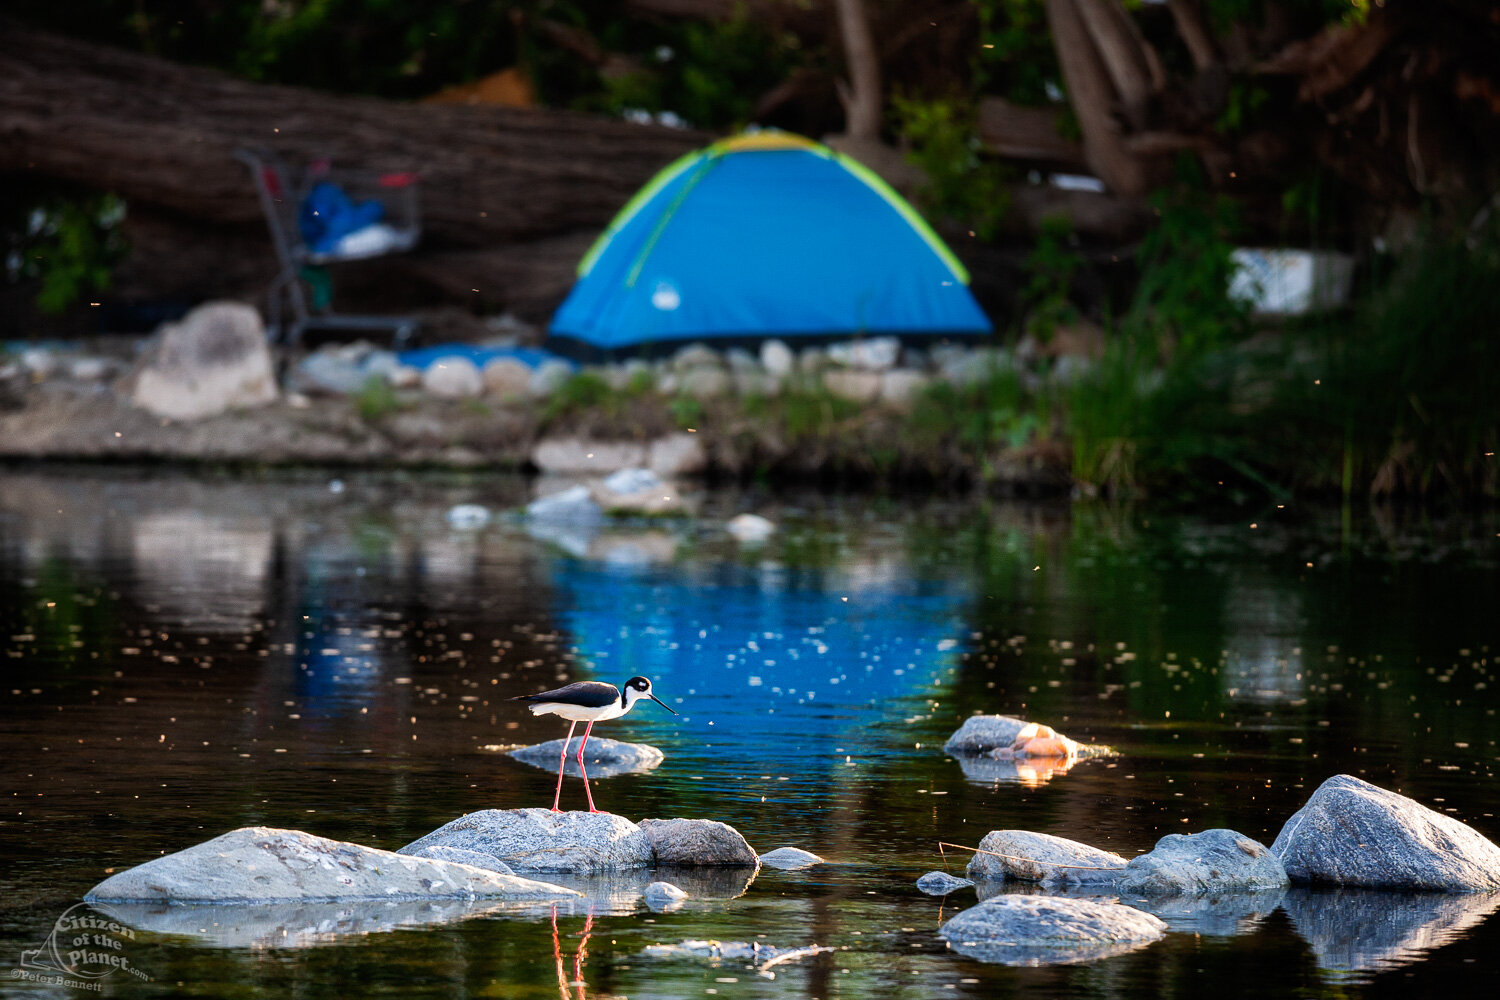  Black-necked Stilt and homeless tent along the Glendale Narrows. Many homeless make their camps along this part of the river due to the protections of the thick underbrush and trees.  